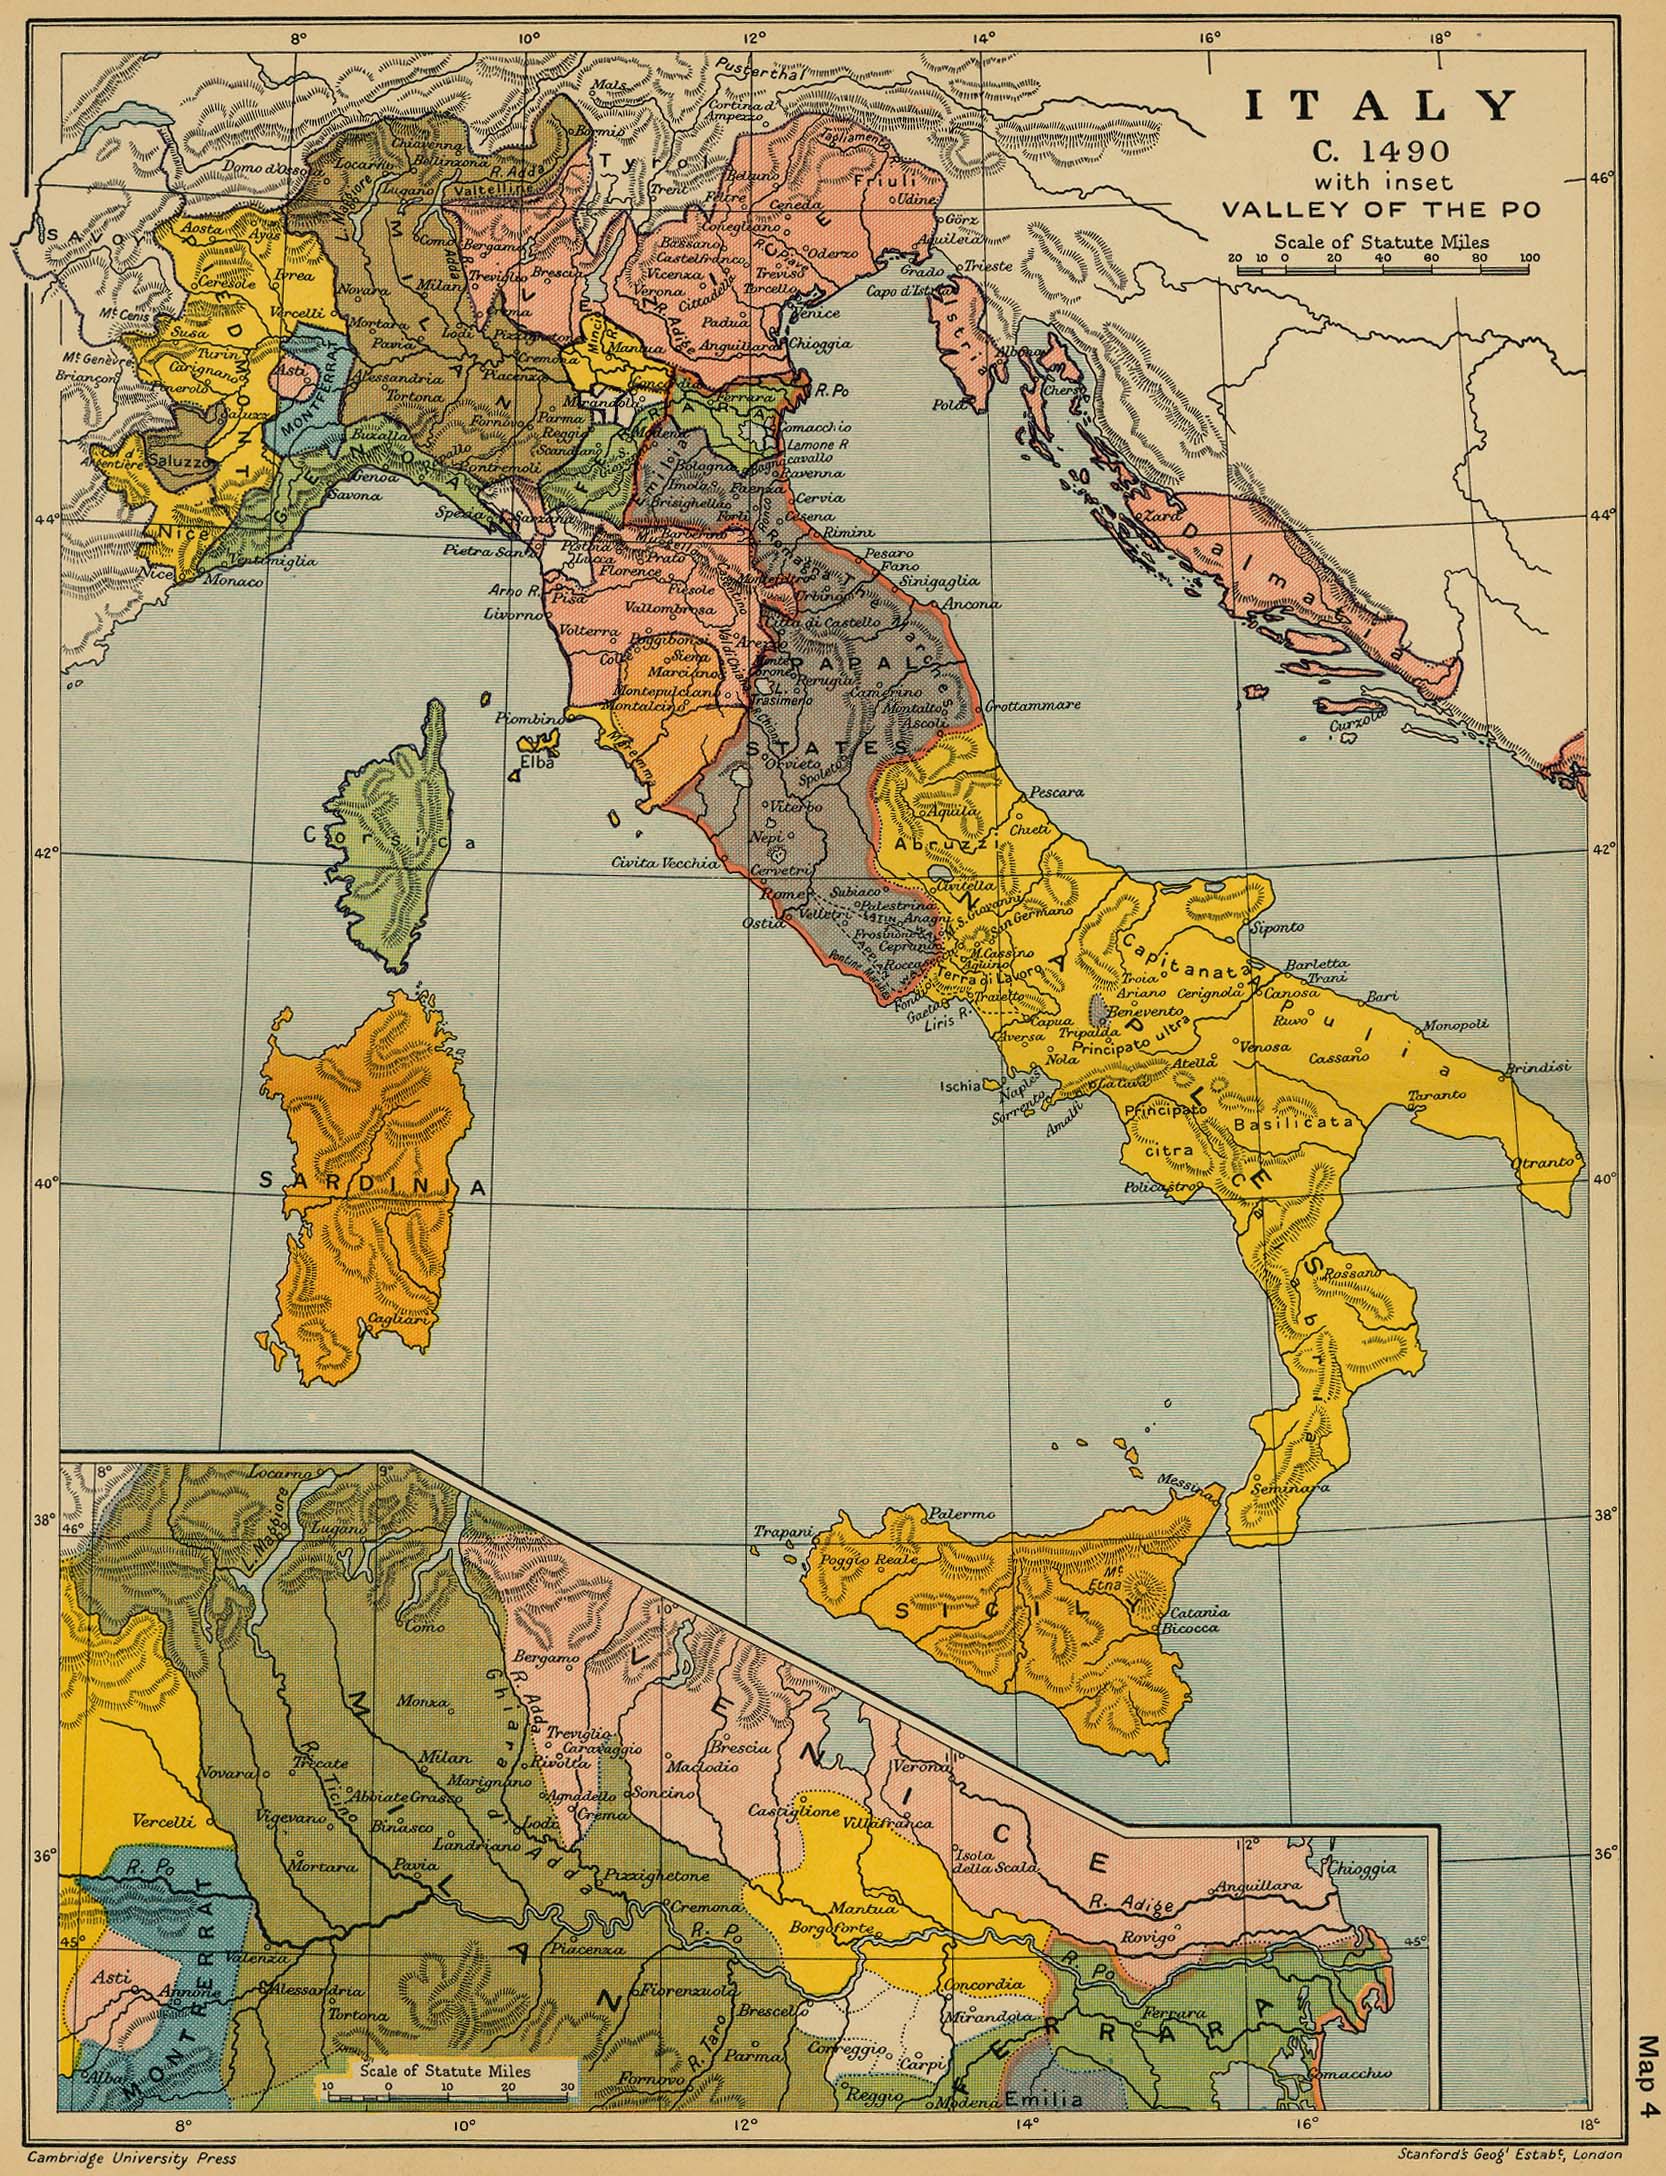 Map of Italy in 1490. Inset: Valley of the Po.